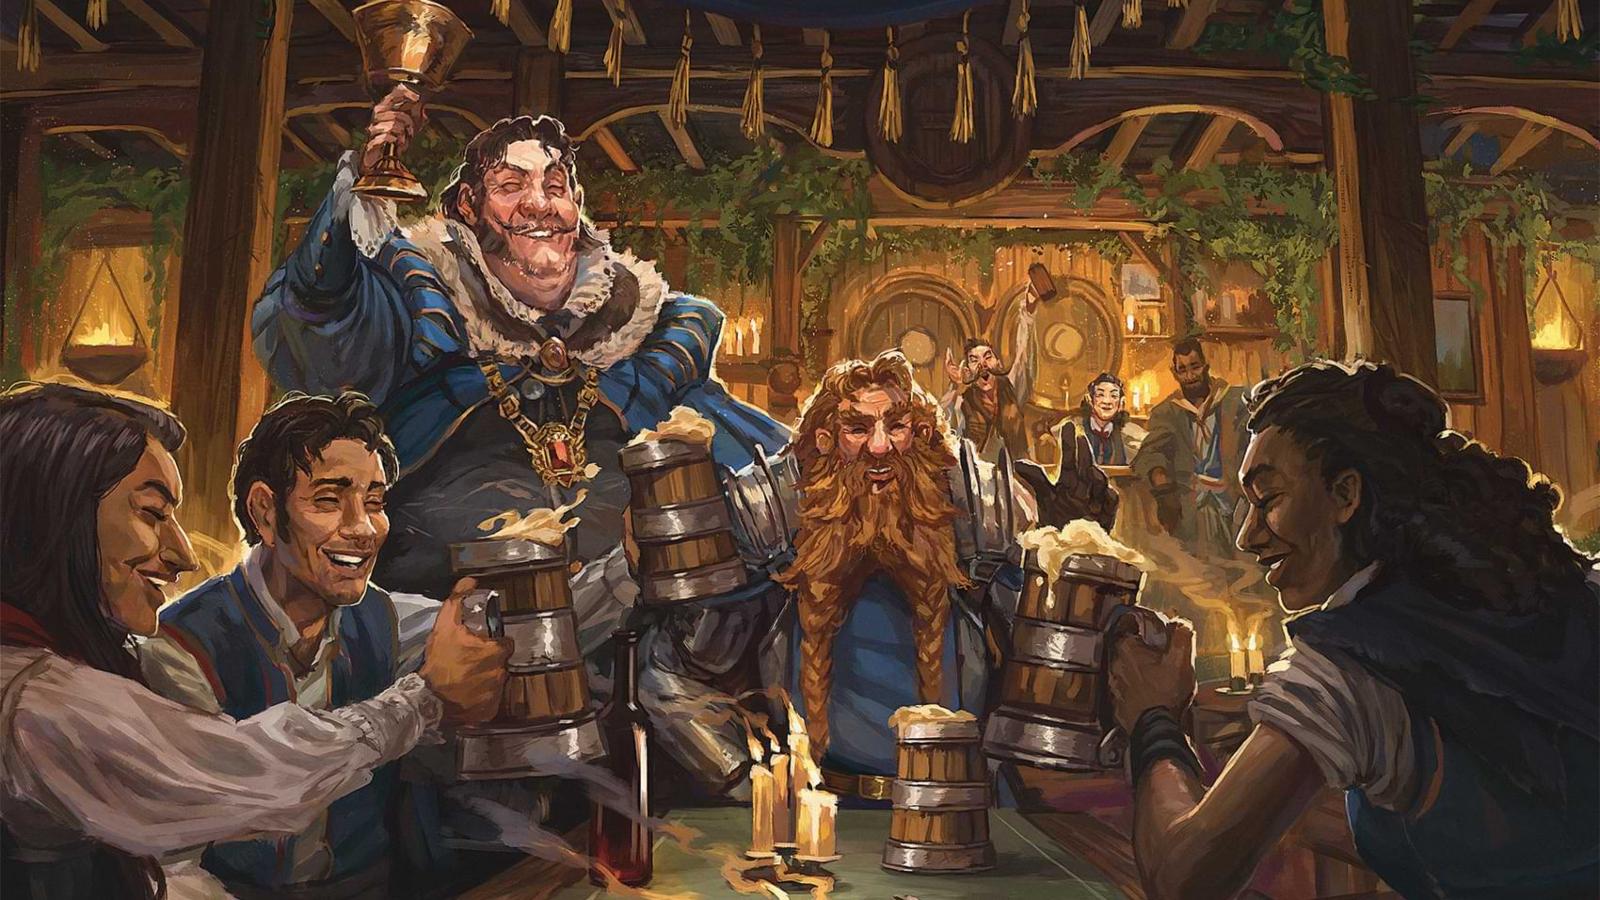 Official D&D art of characters drinking in a tavern or Bastion